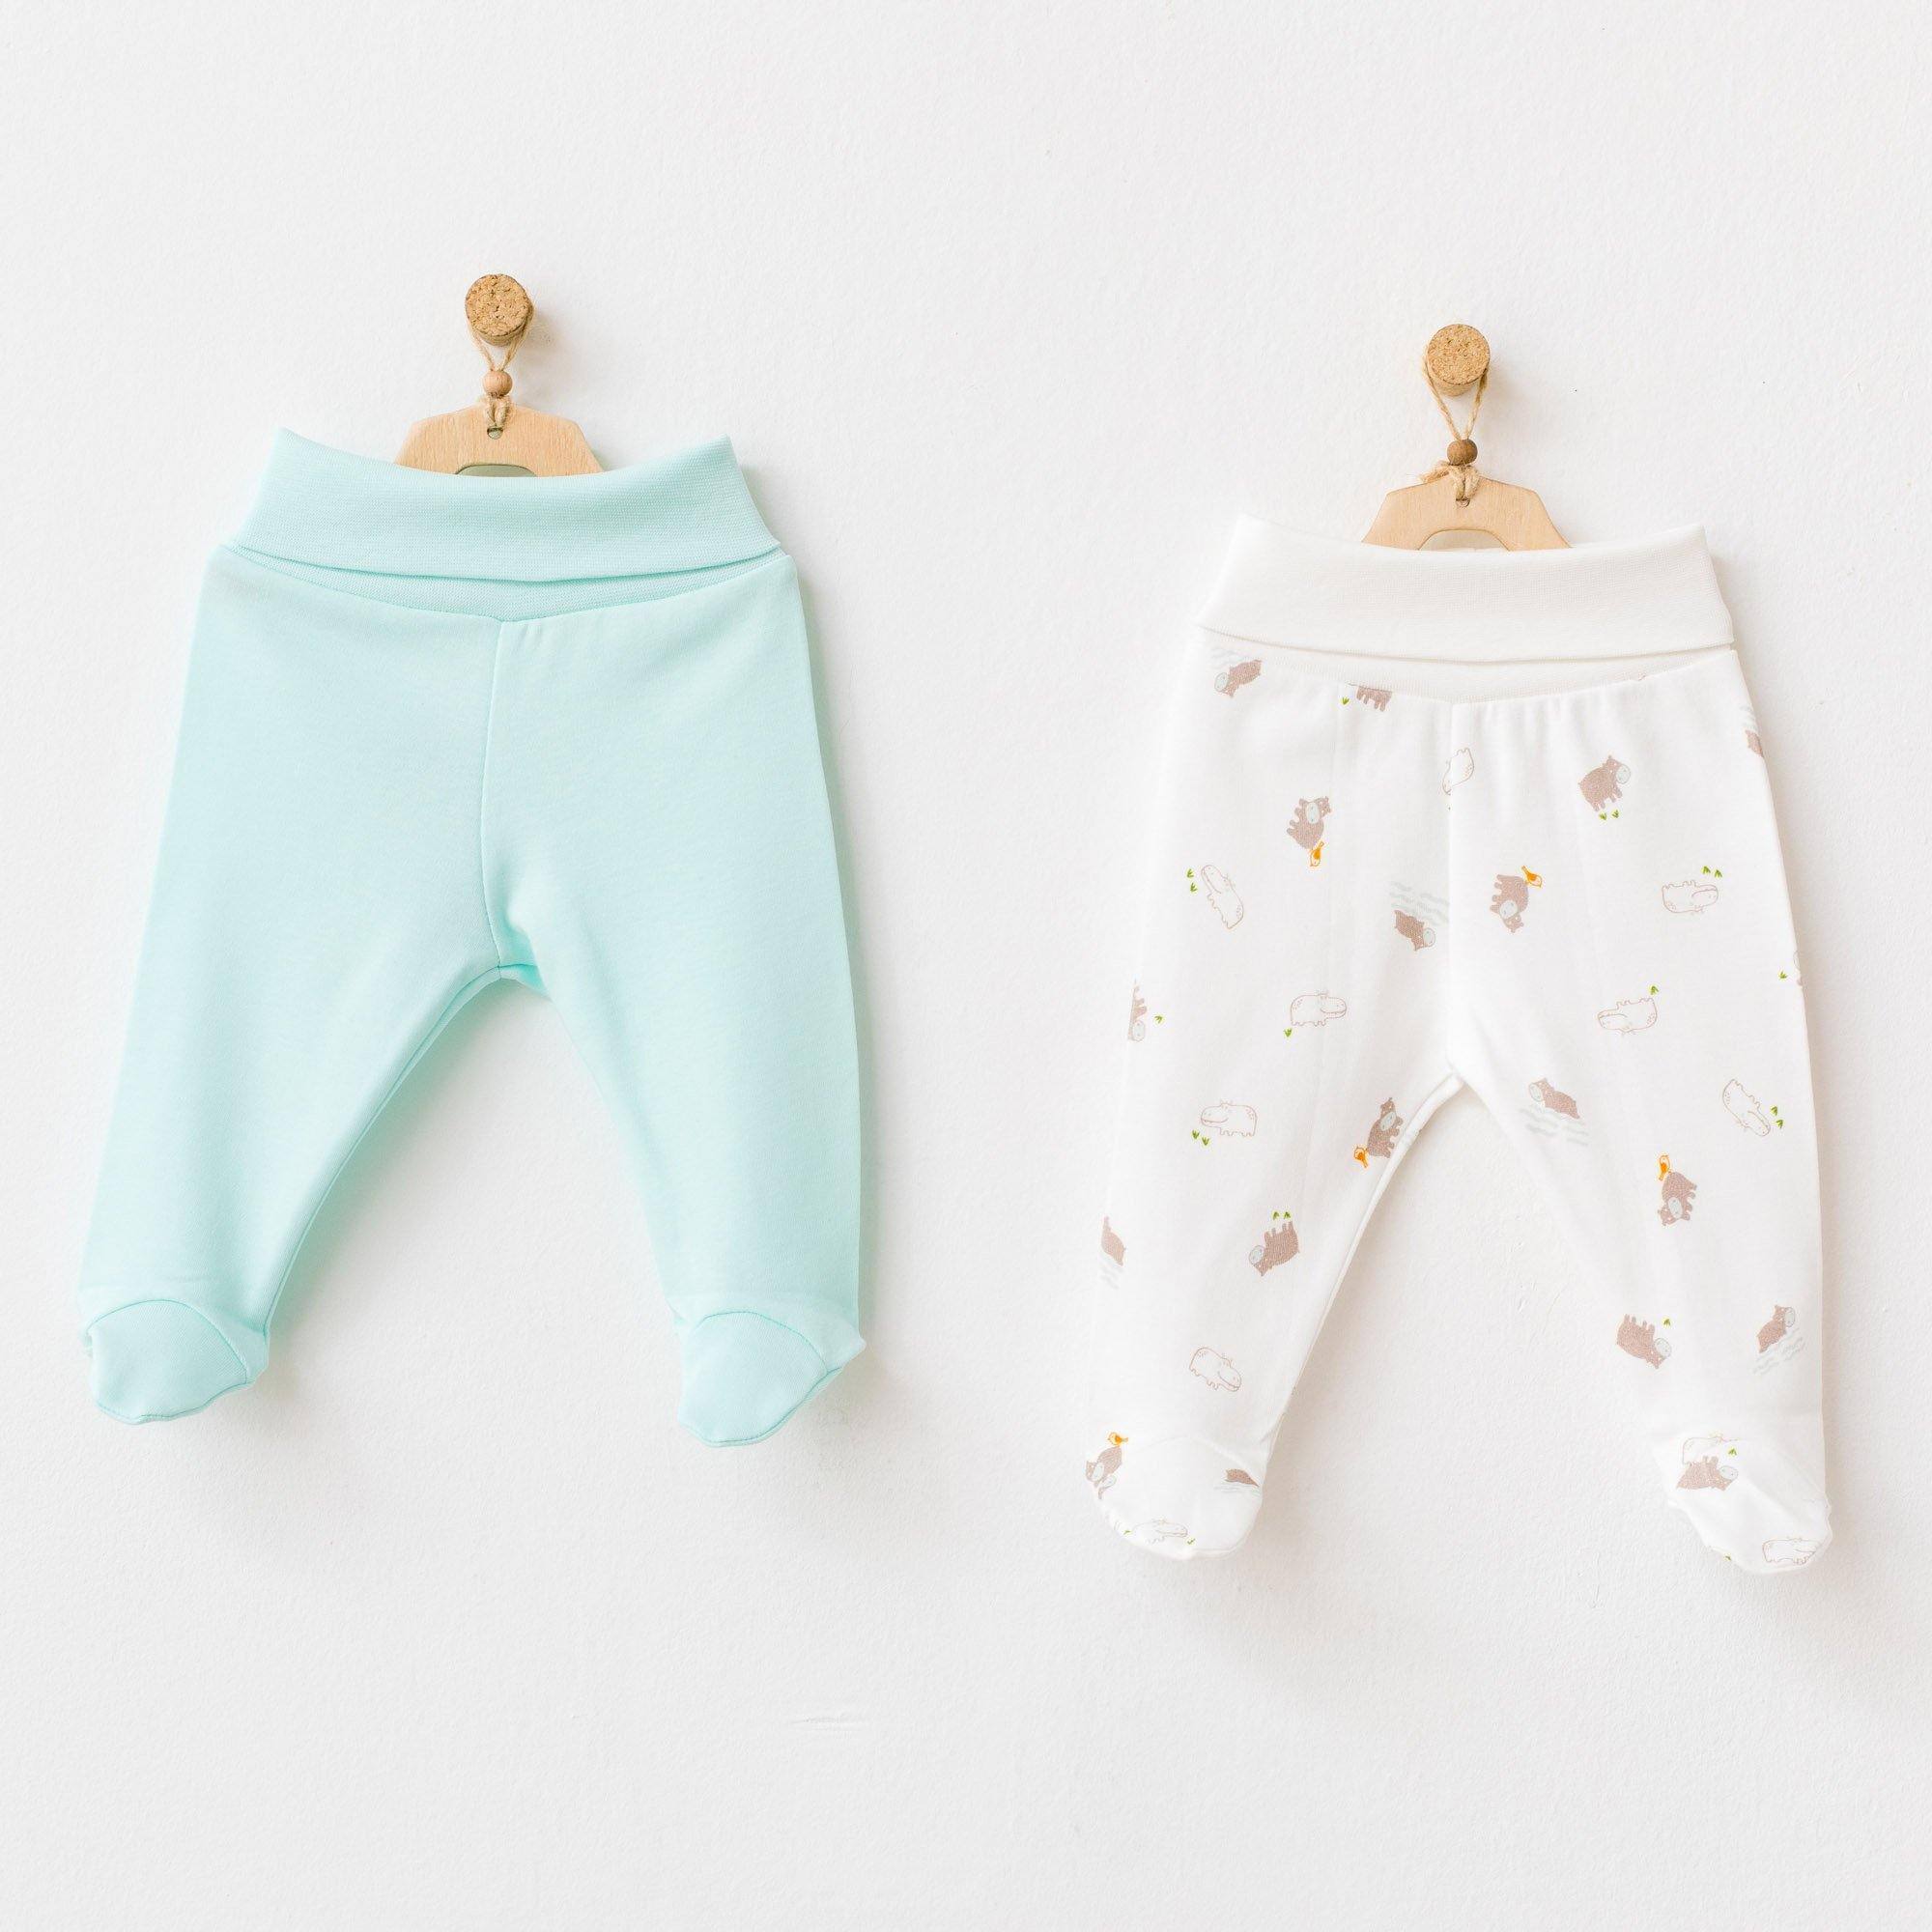 Hippo - 2 Pieces Footed Pants - Hippo - 2 Pieces Footed Pants - 0-3 Months - Andywawa - Melymod